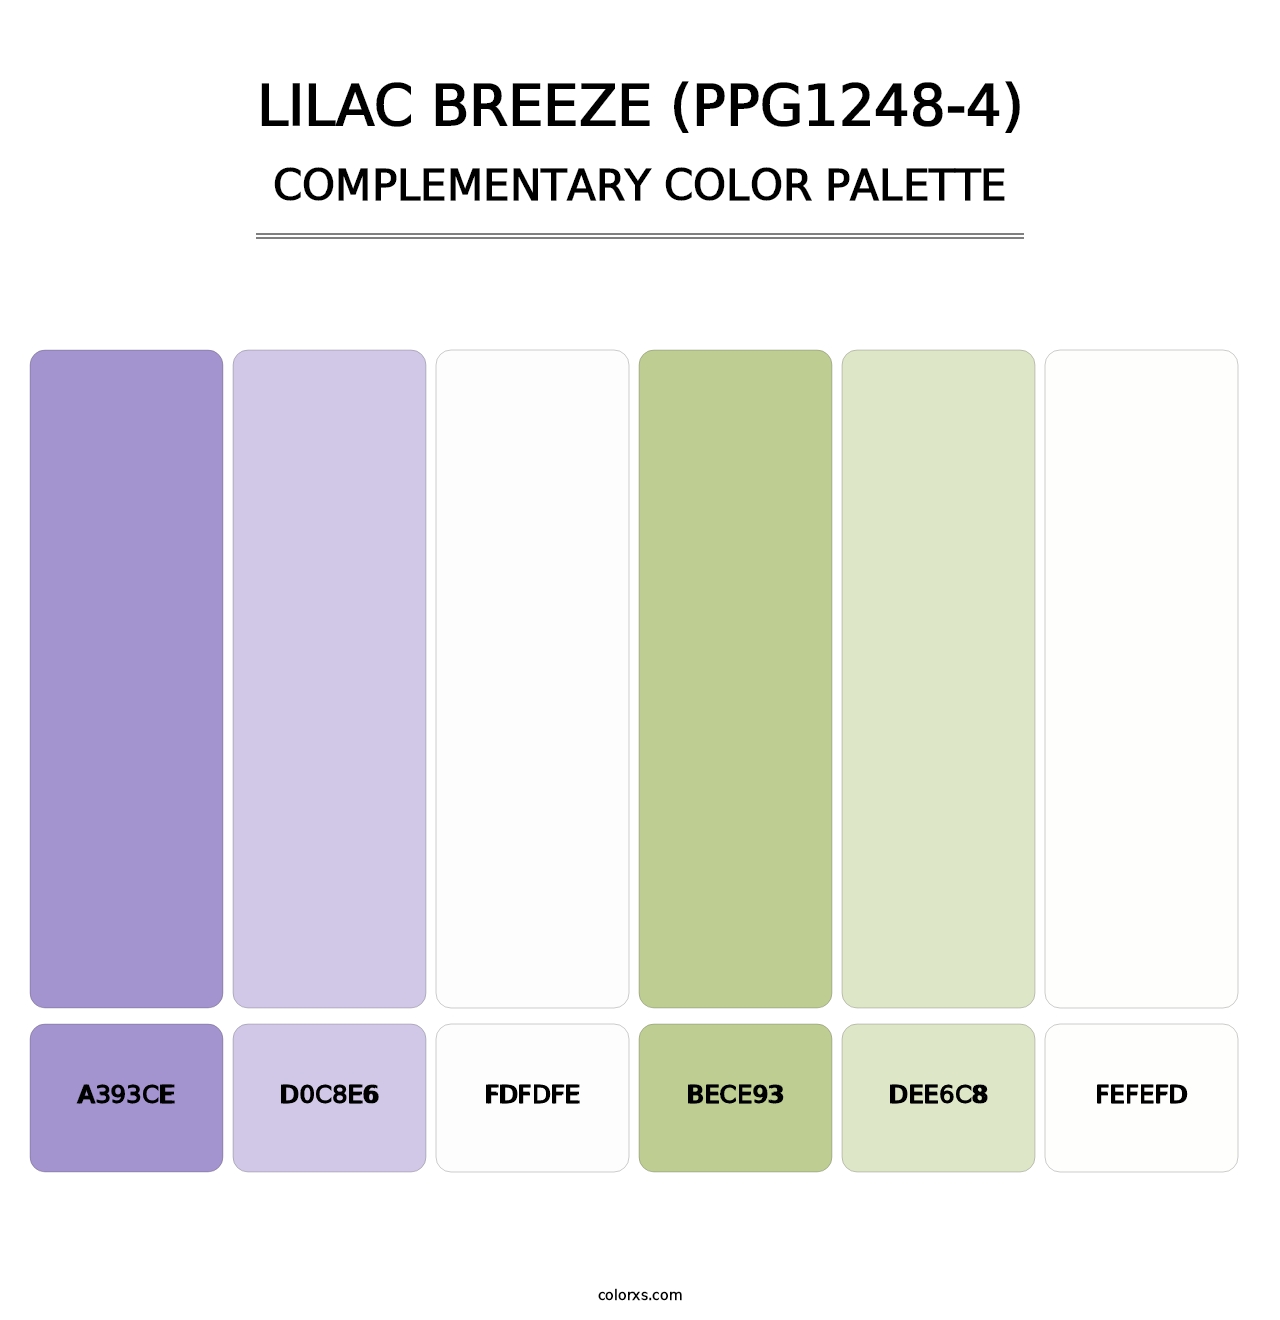 Lilac Breeze (PPG1248-4) - Complementary Color Palette